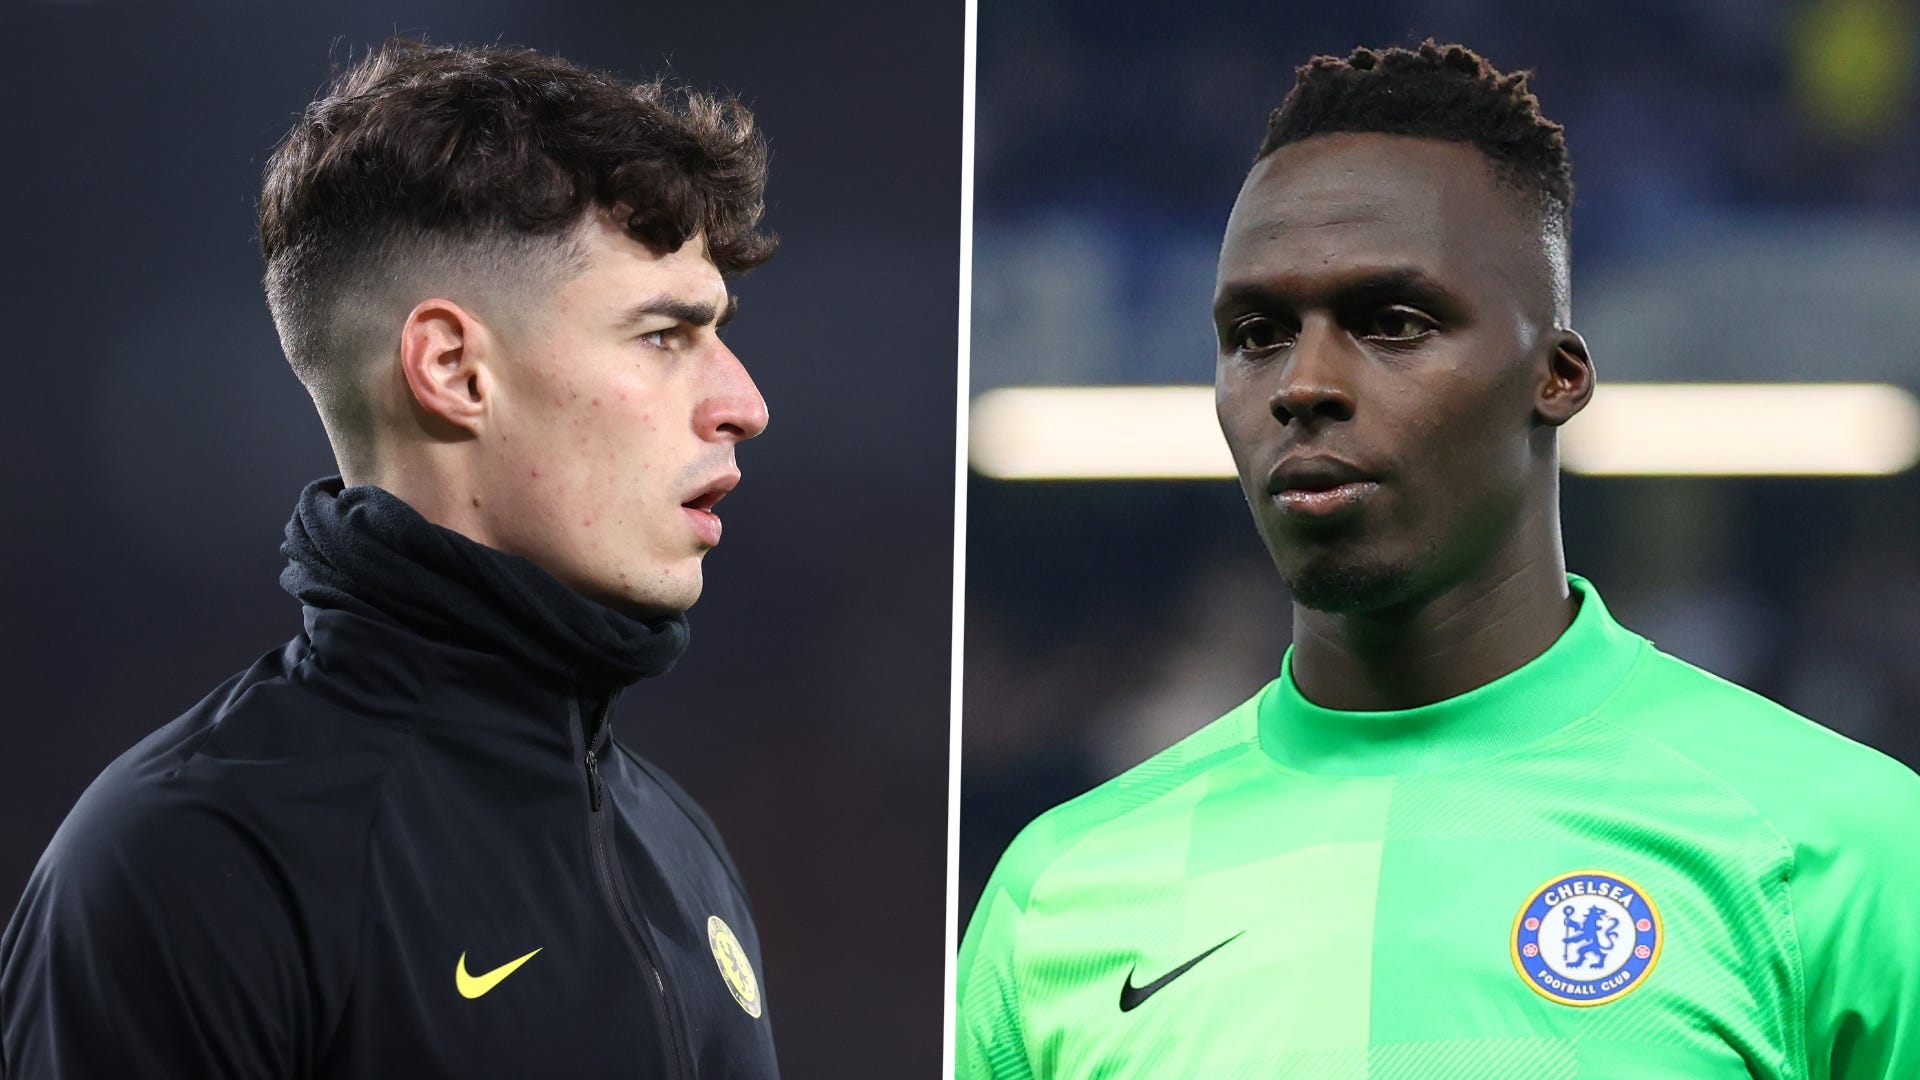 Chelsea Club World Cup final team news Who will start in goal vs Palmeiras as Mendy competes with Kepa? Goal US